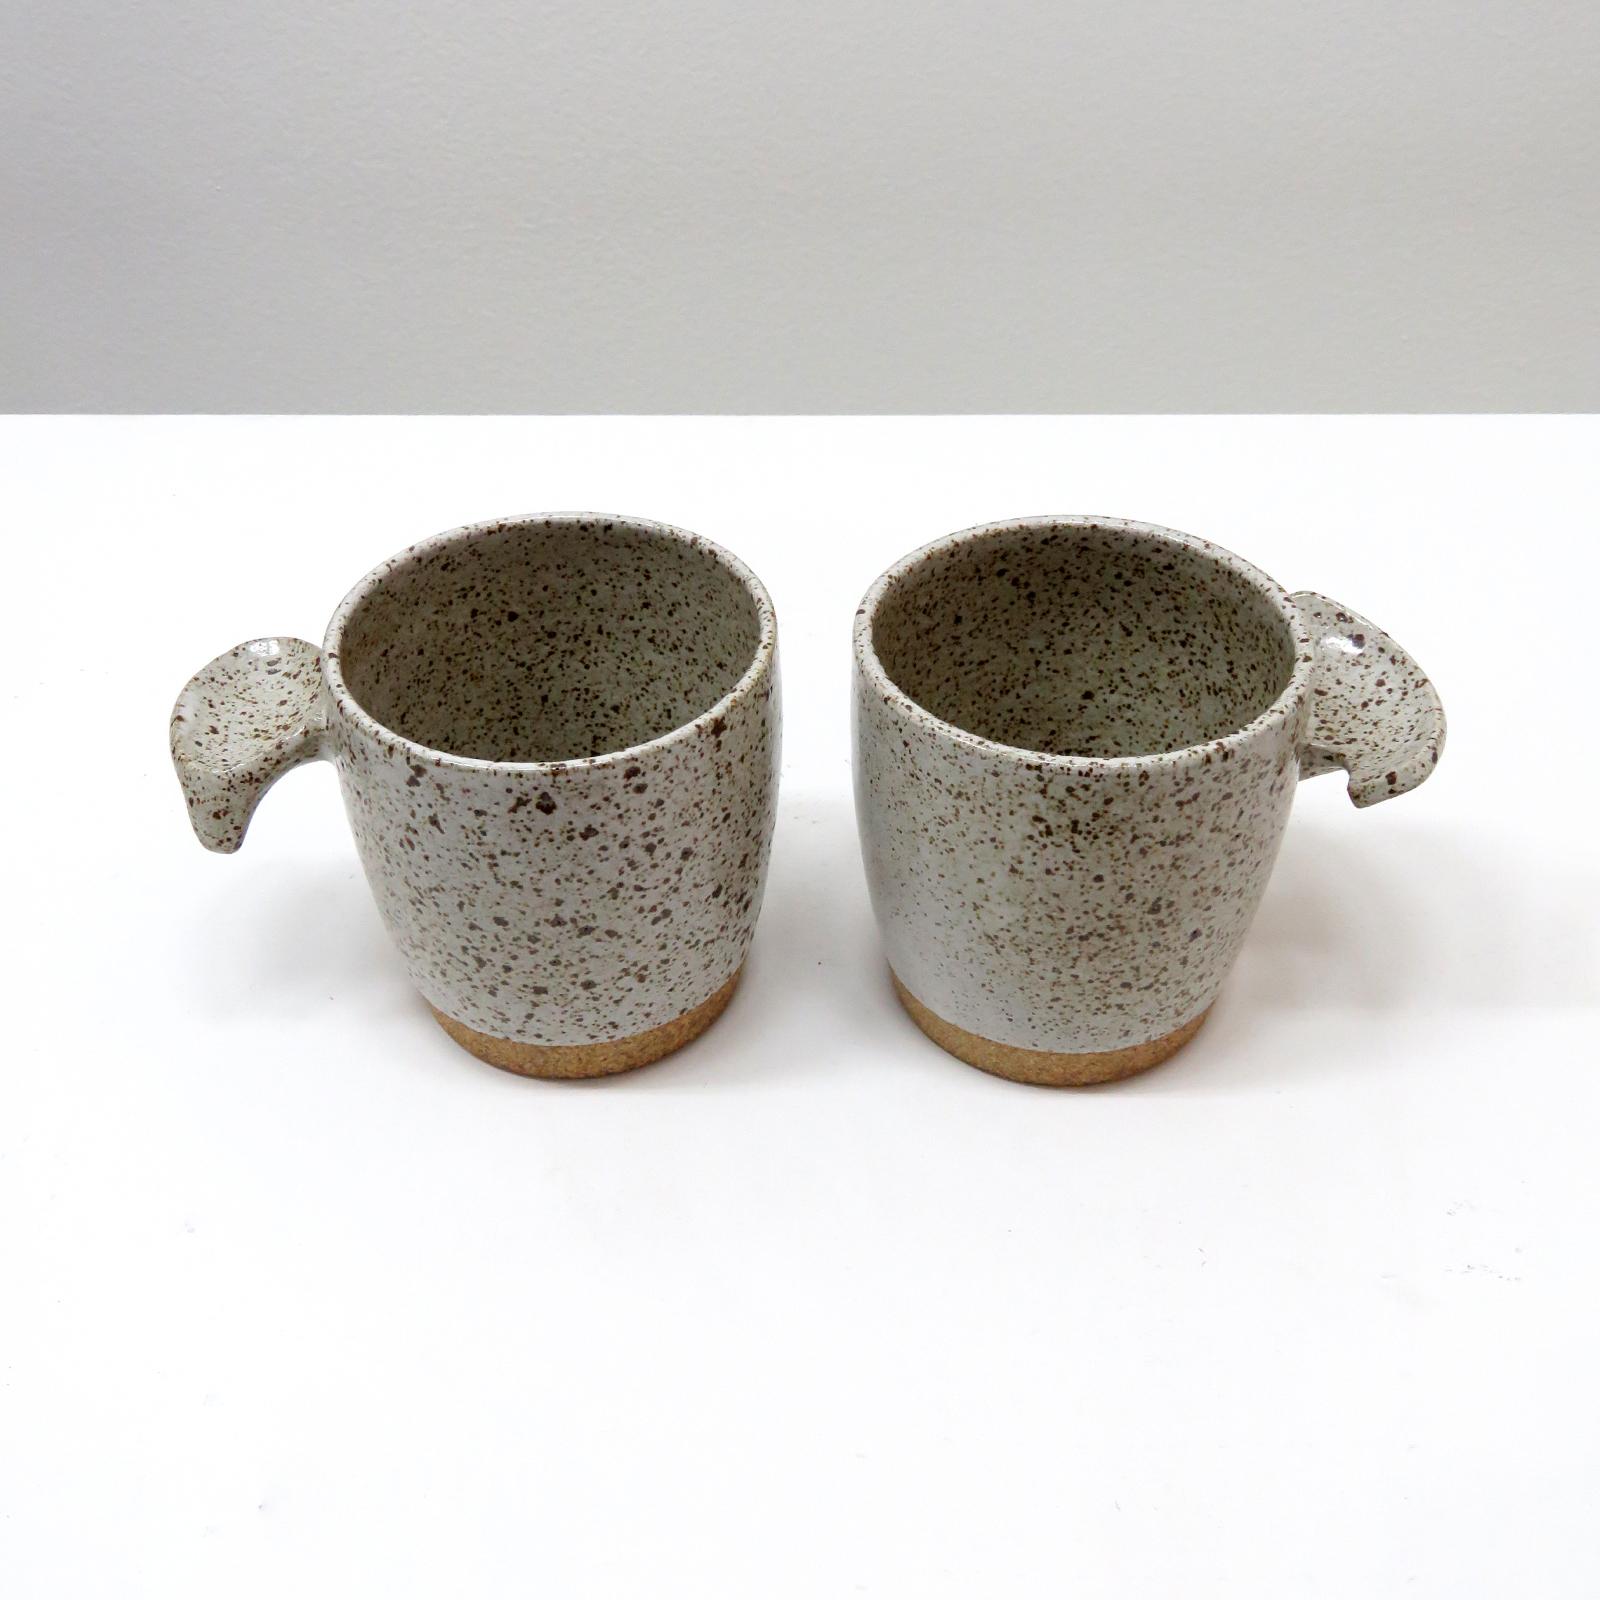 wonderful 'Fin' mugs, handcrafted by Los Angeles based ceramicist Jed Farlow for Farlow Design. High fired stoneware with matte white speckled glaze. Designed with a human-centered approach in mind, these one-of-a-kind mugs are experimenting with